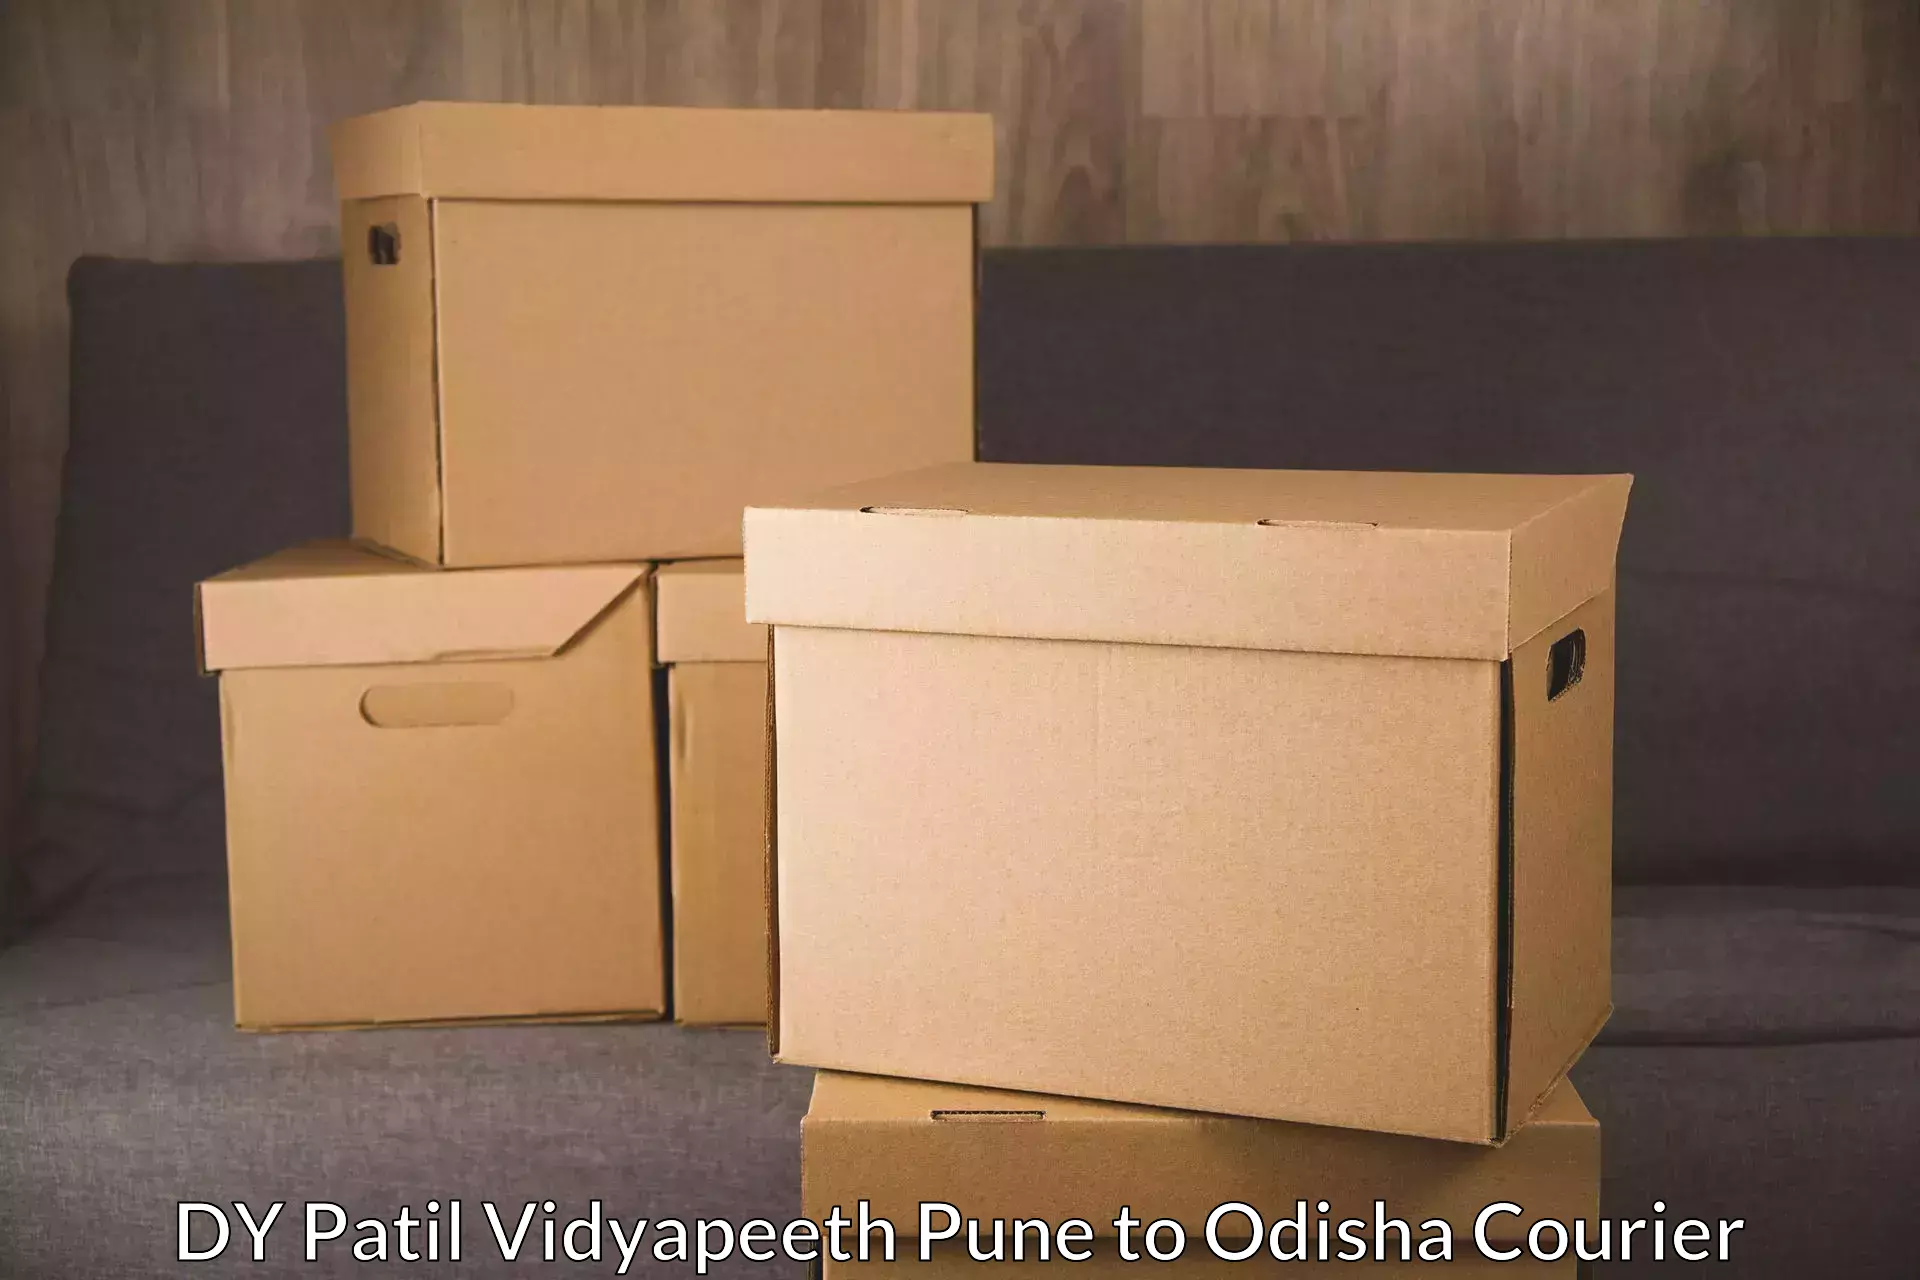 Fast delivery service DY Patil Vidyapeeth Pune to Agarpada